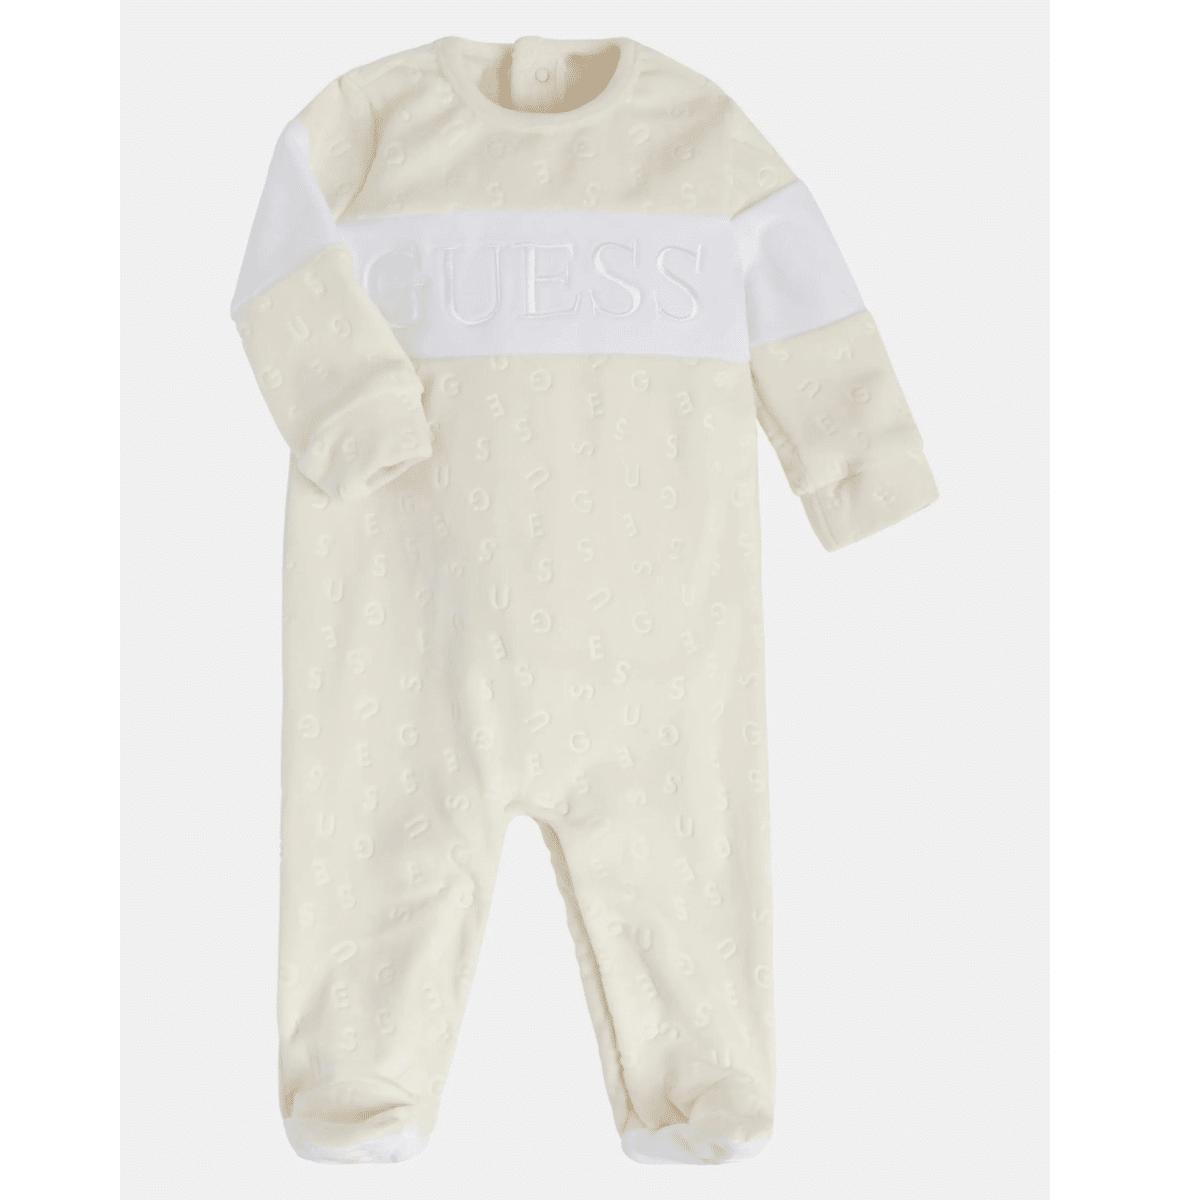 Guess baby pale yellow winter babygro